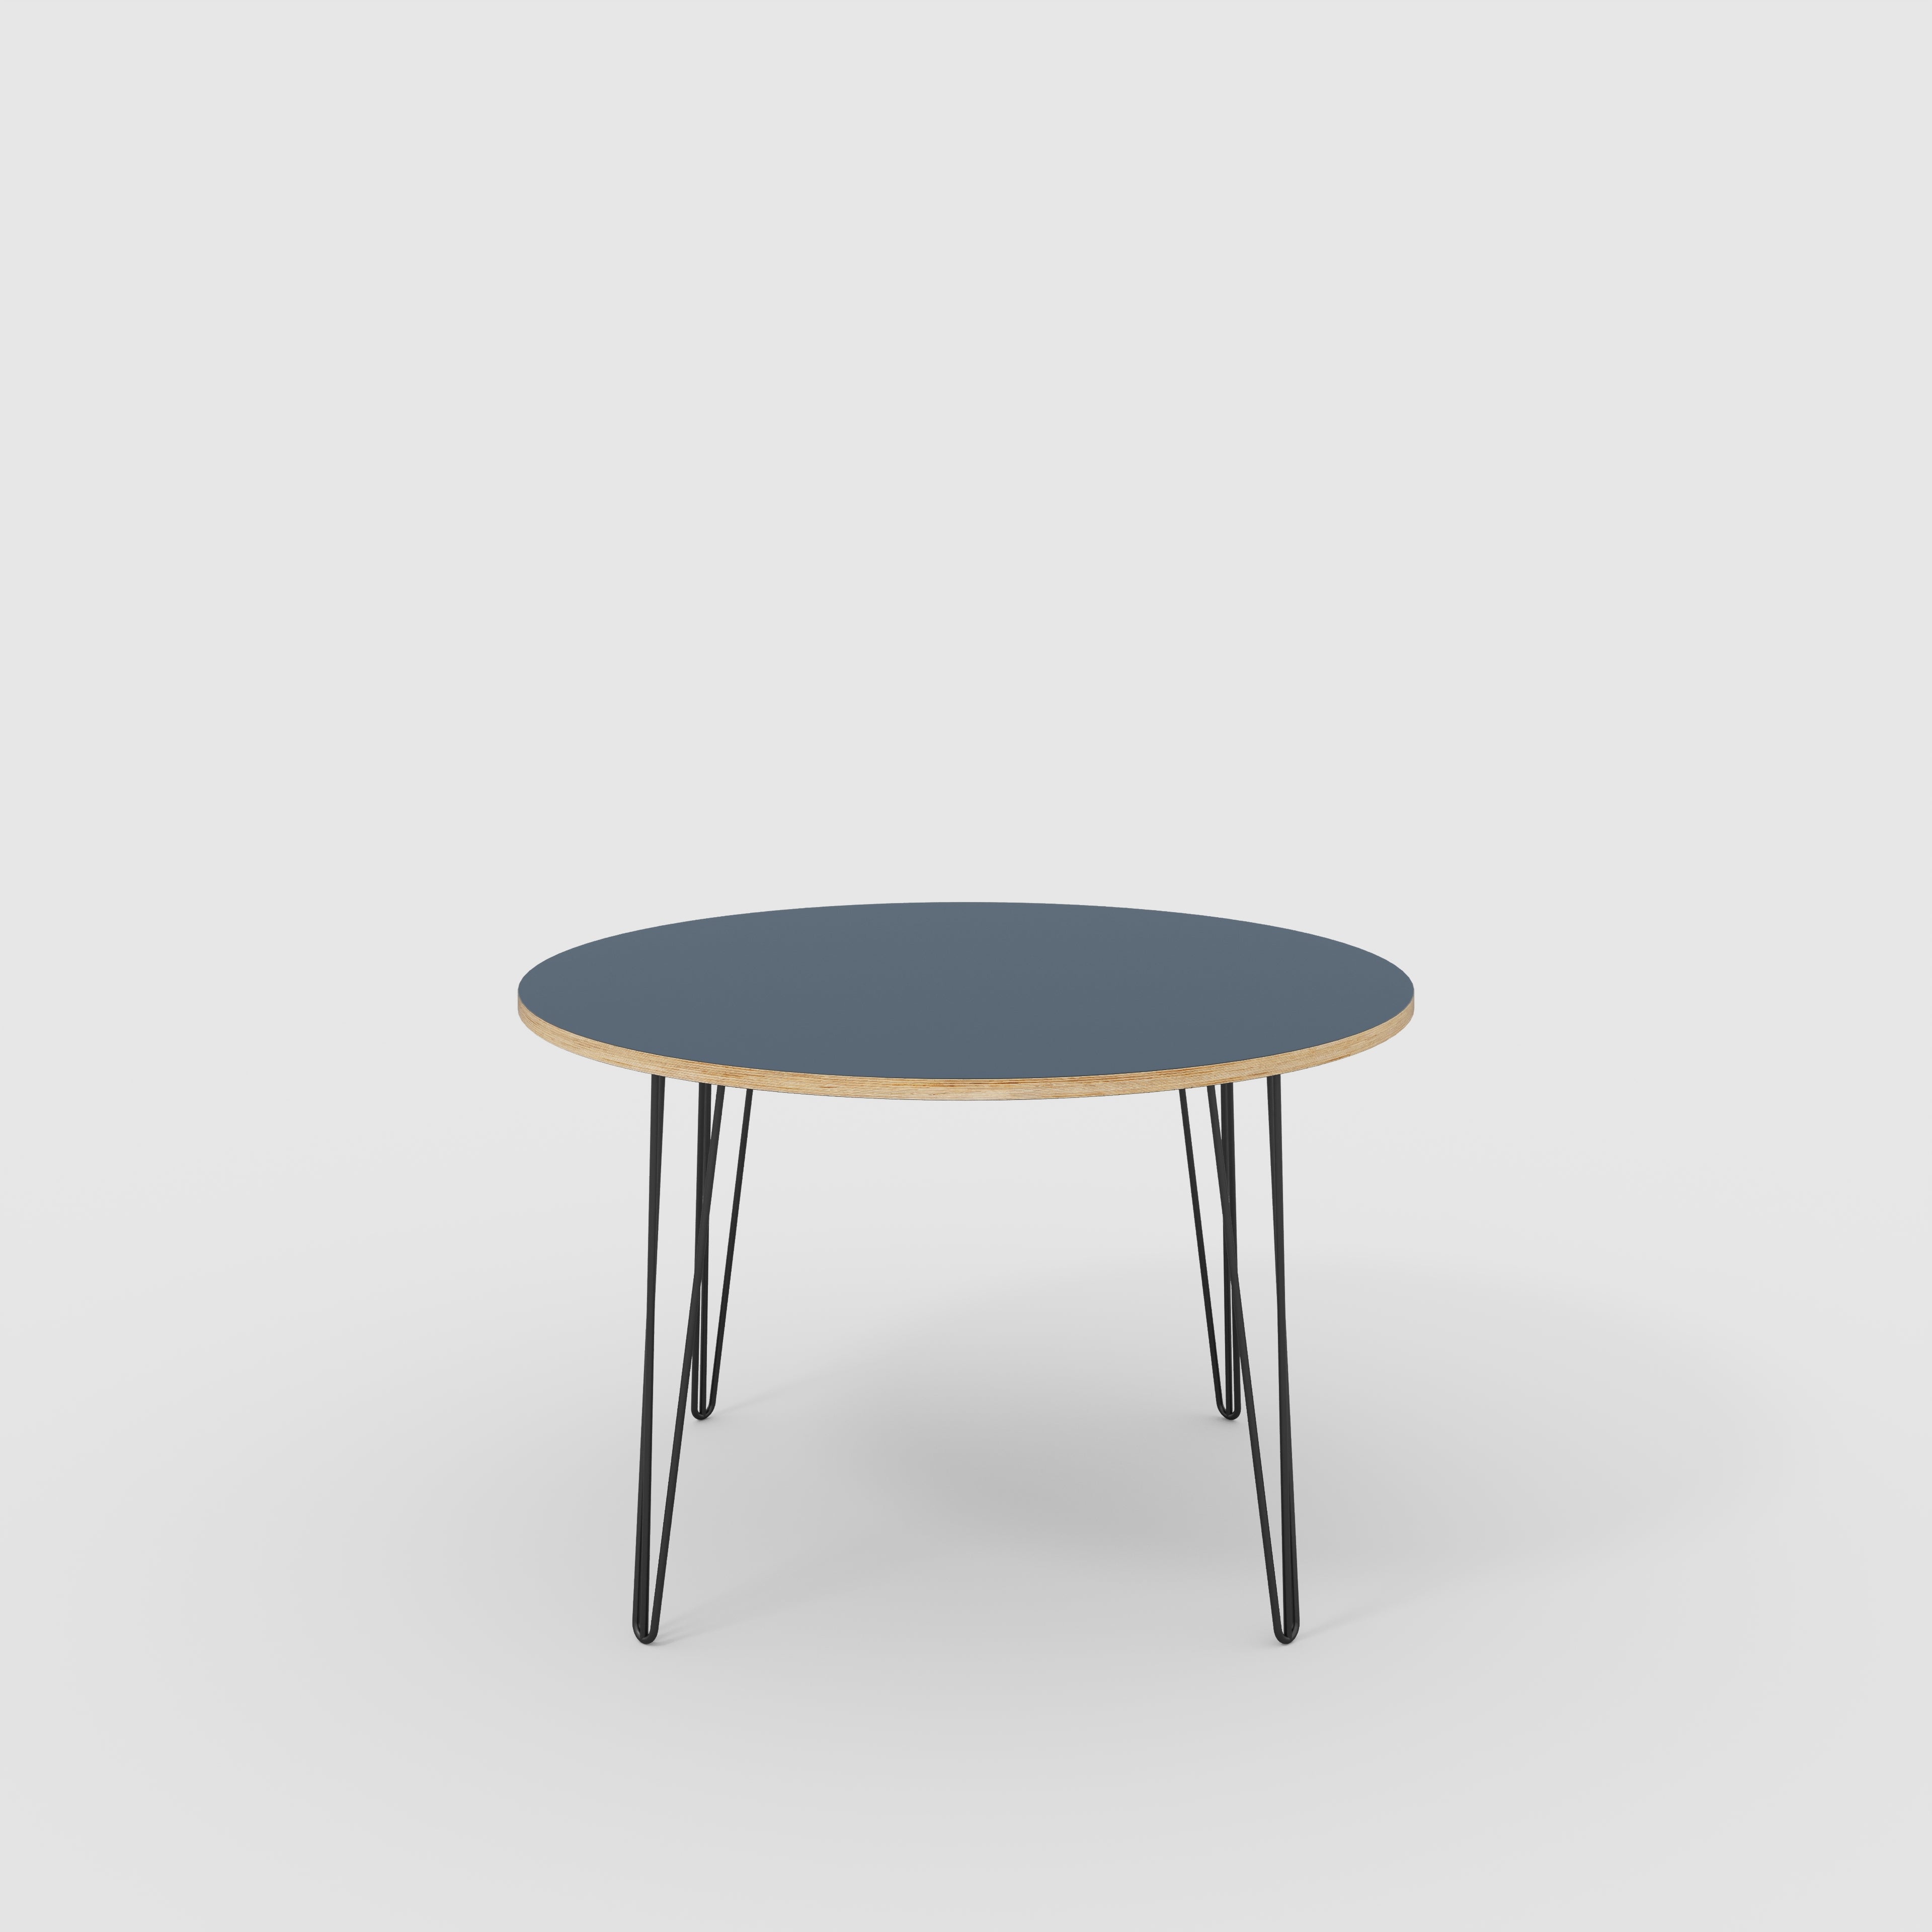 Round Table with Black Hairpin Legs - Formica Night Sea Blue - 1200(dia) x 735(h)